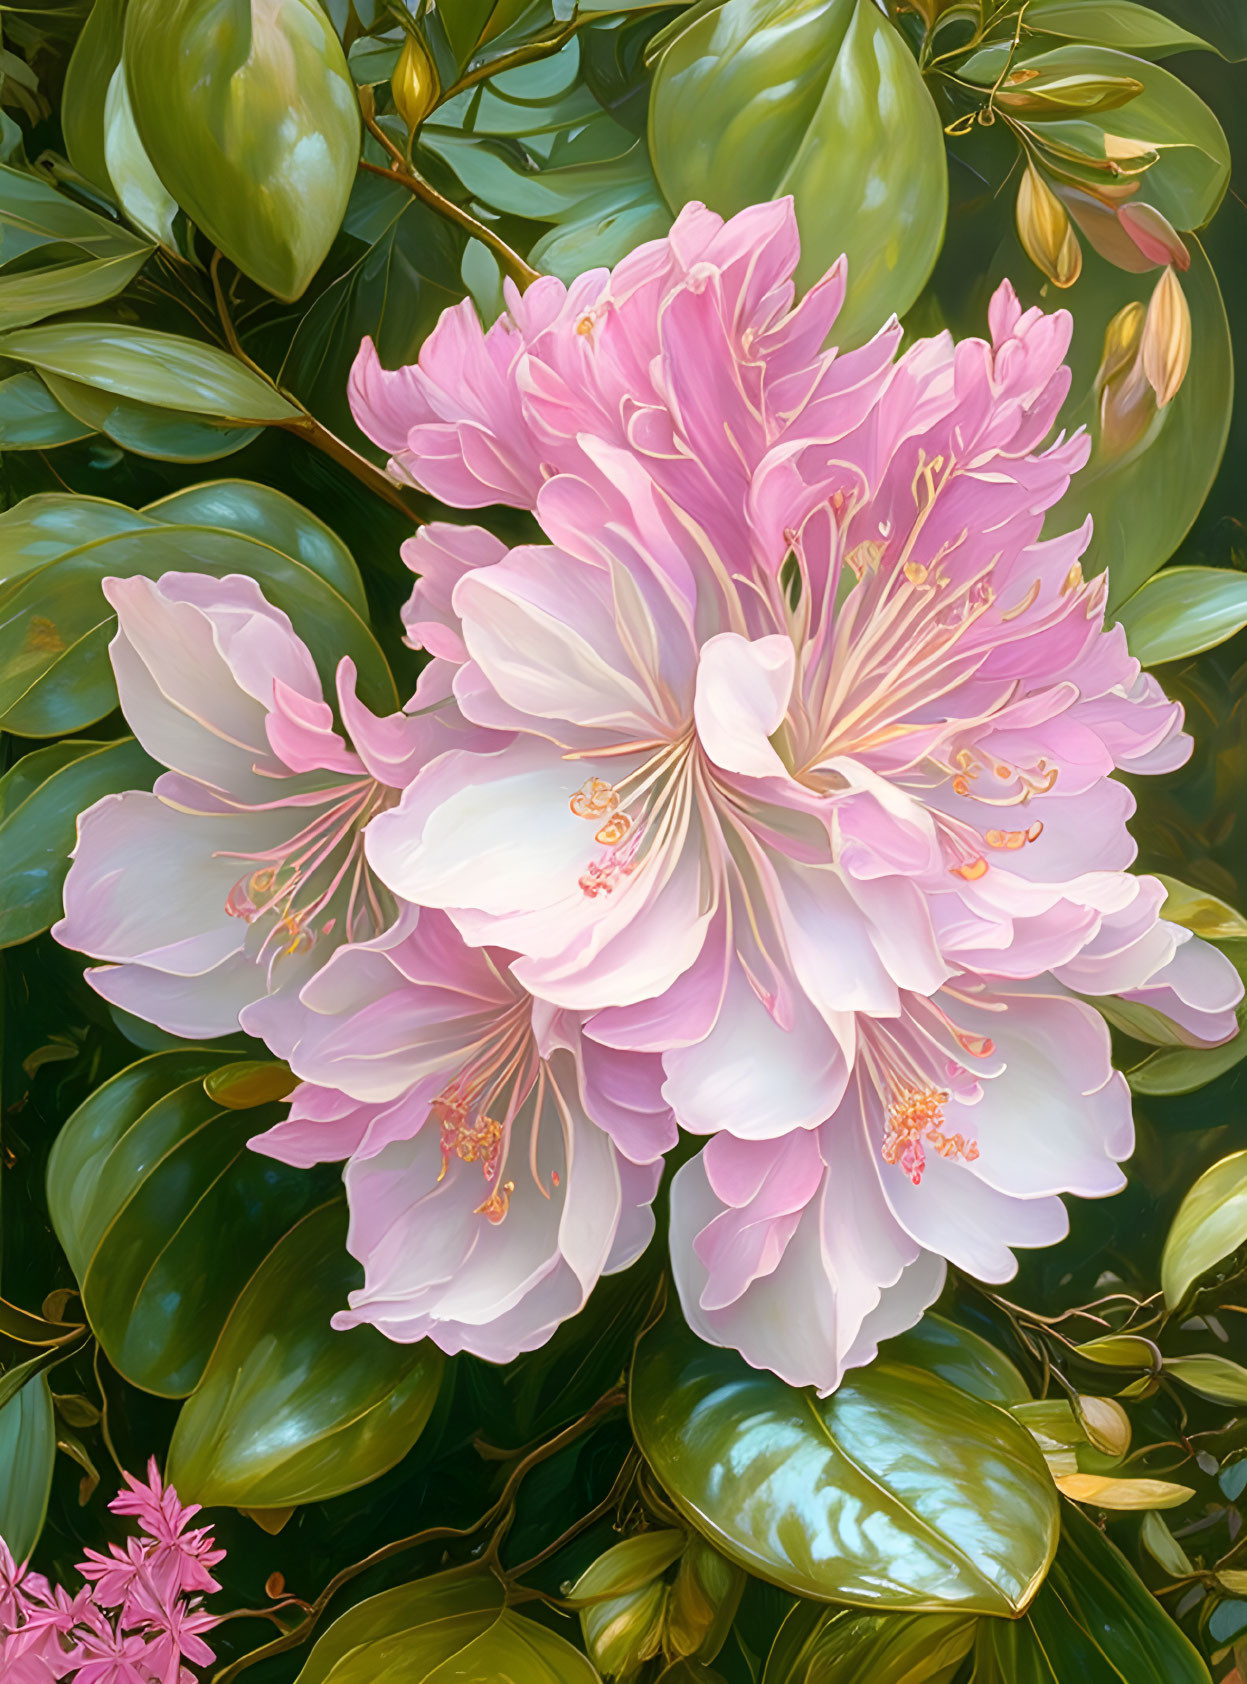 Detailed digital painting of vibrant pink rhododendron blossoms and lush green leaves.